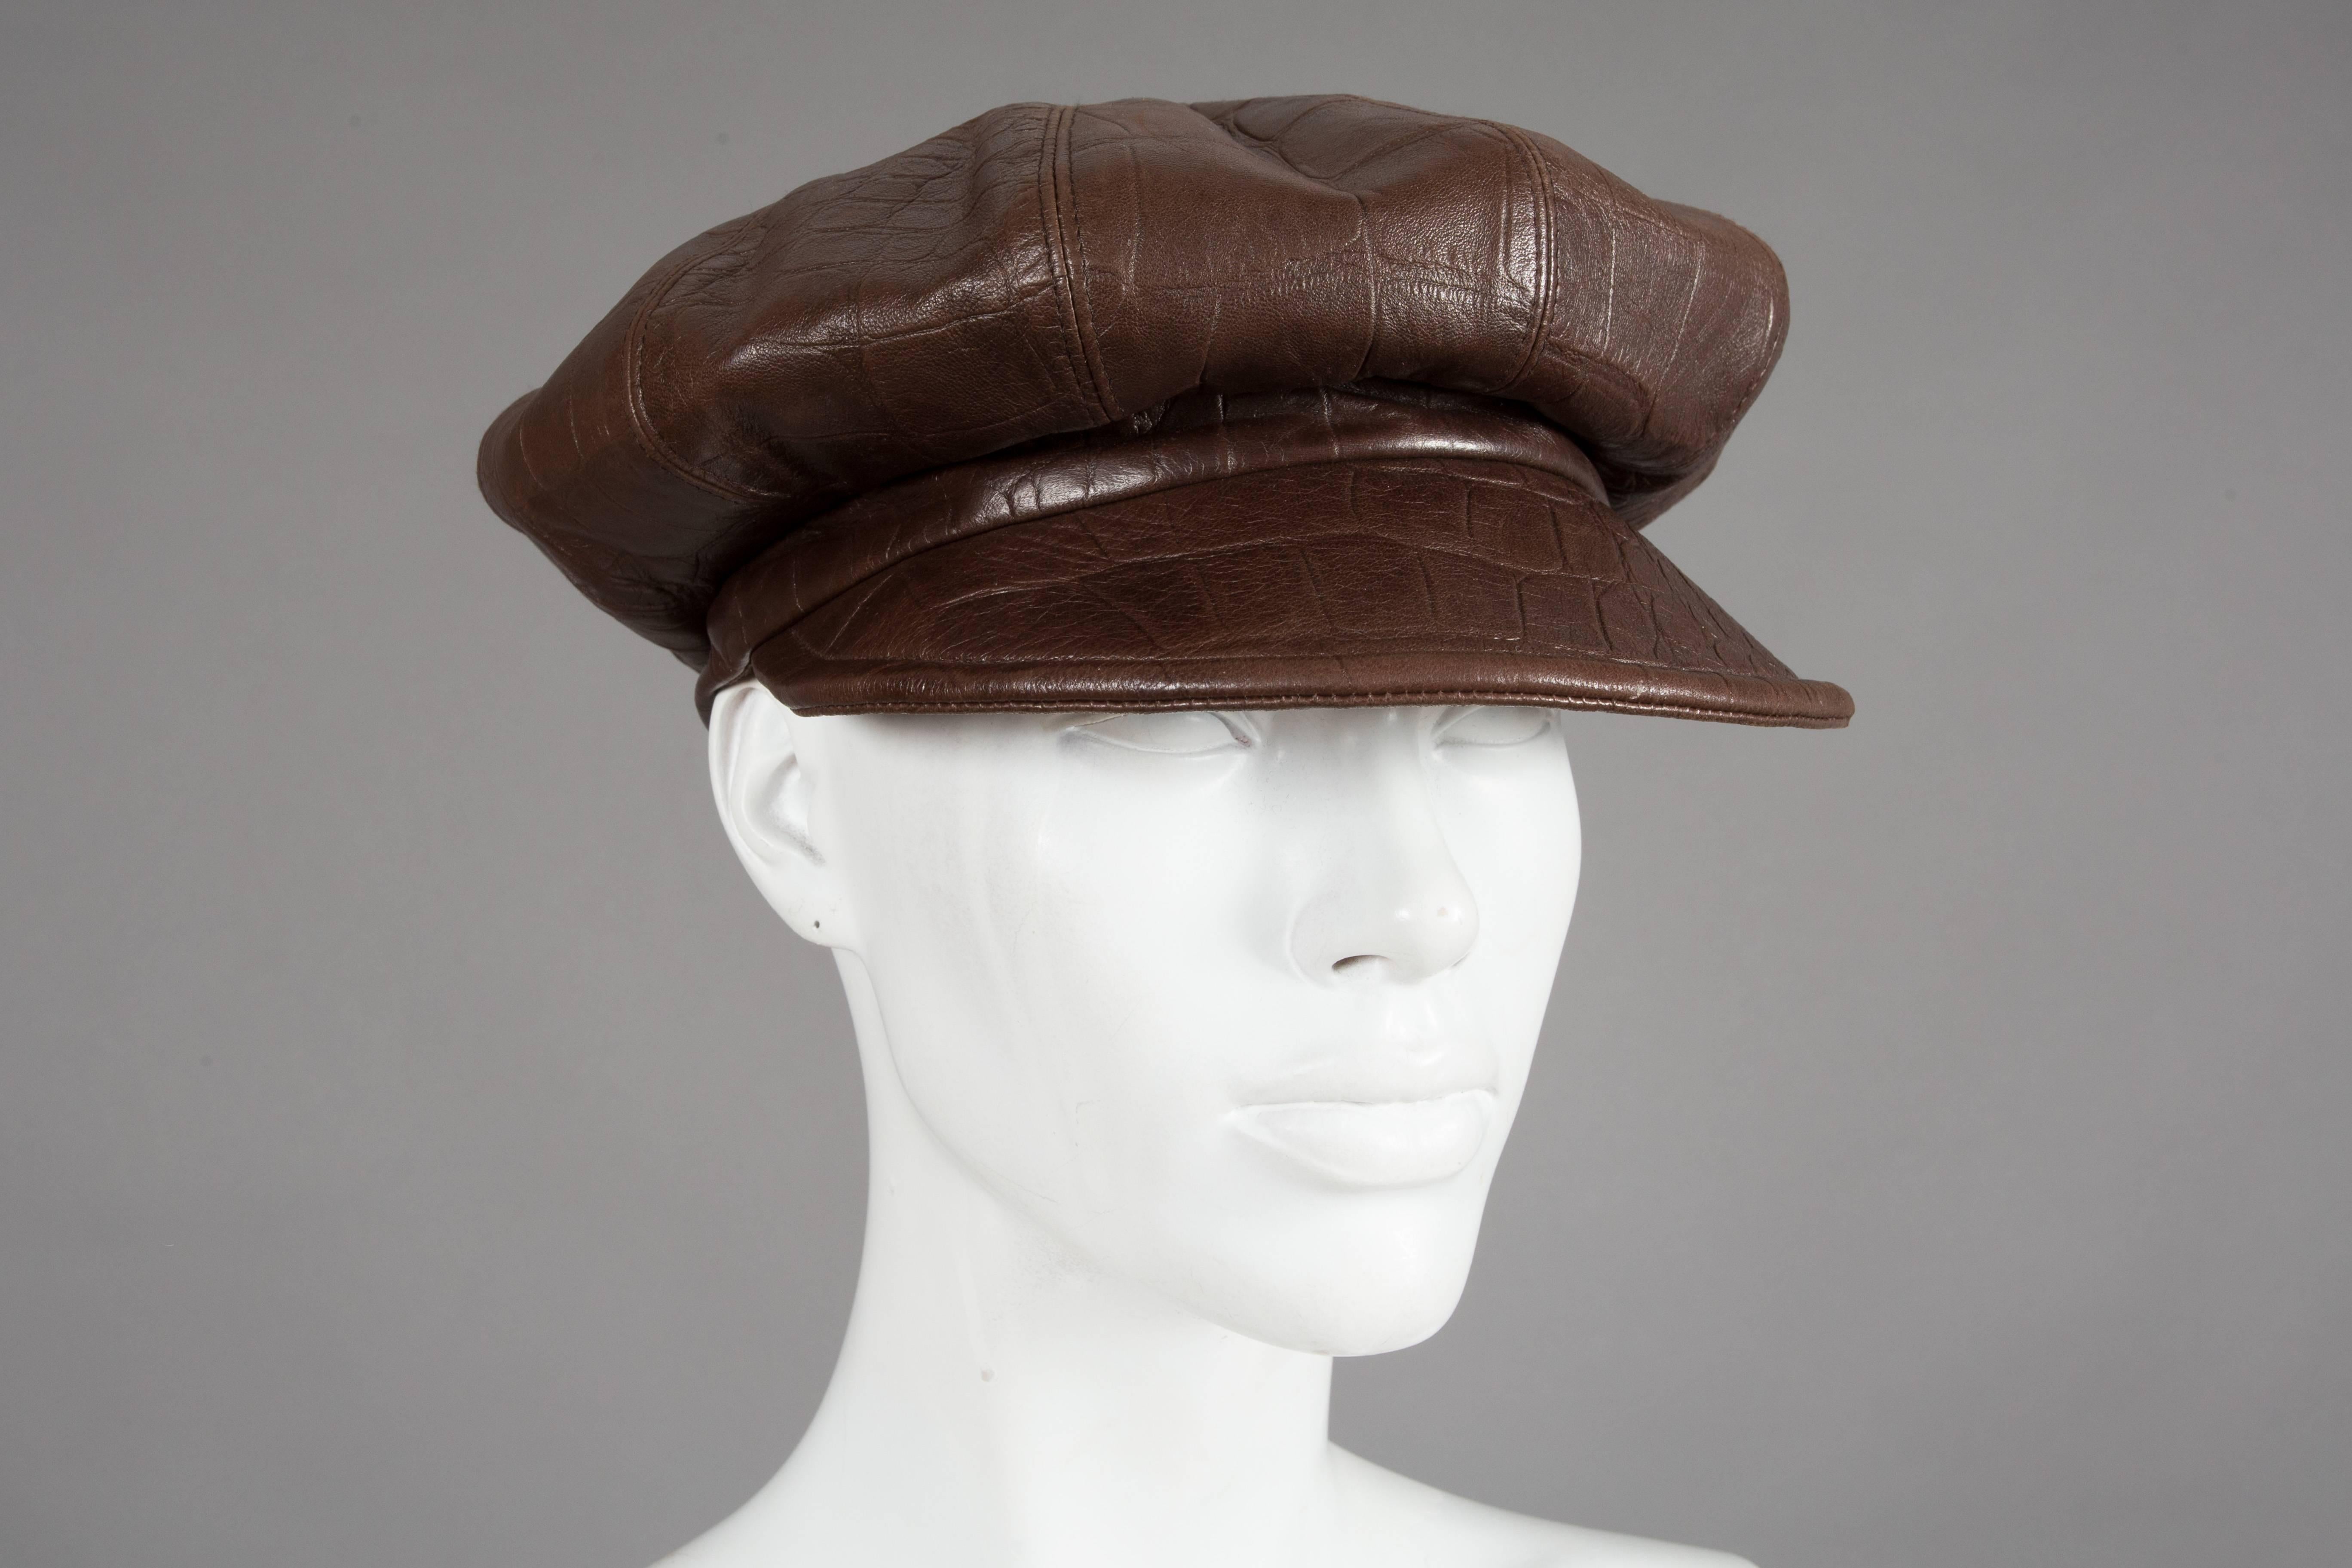 Rare Christian Dior by John Galliano brown crocodile embossed leather newsboy cap, RTW autumn-winter 2005 collection. The cap features a soft top, button at centre top, metal 'Dior' plate at rear and monogram lining. 

Size 58